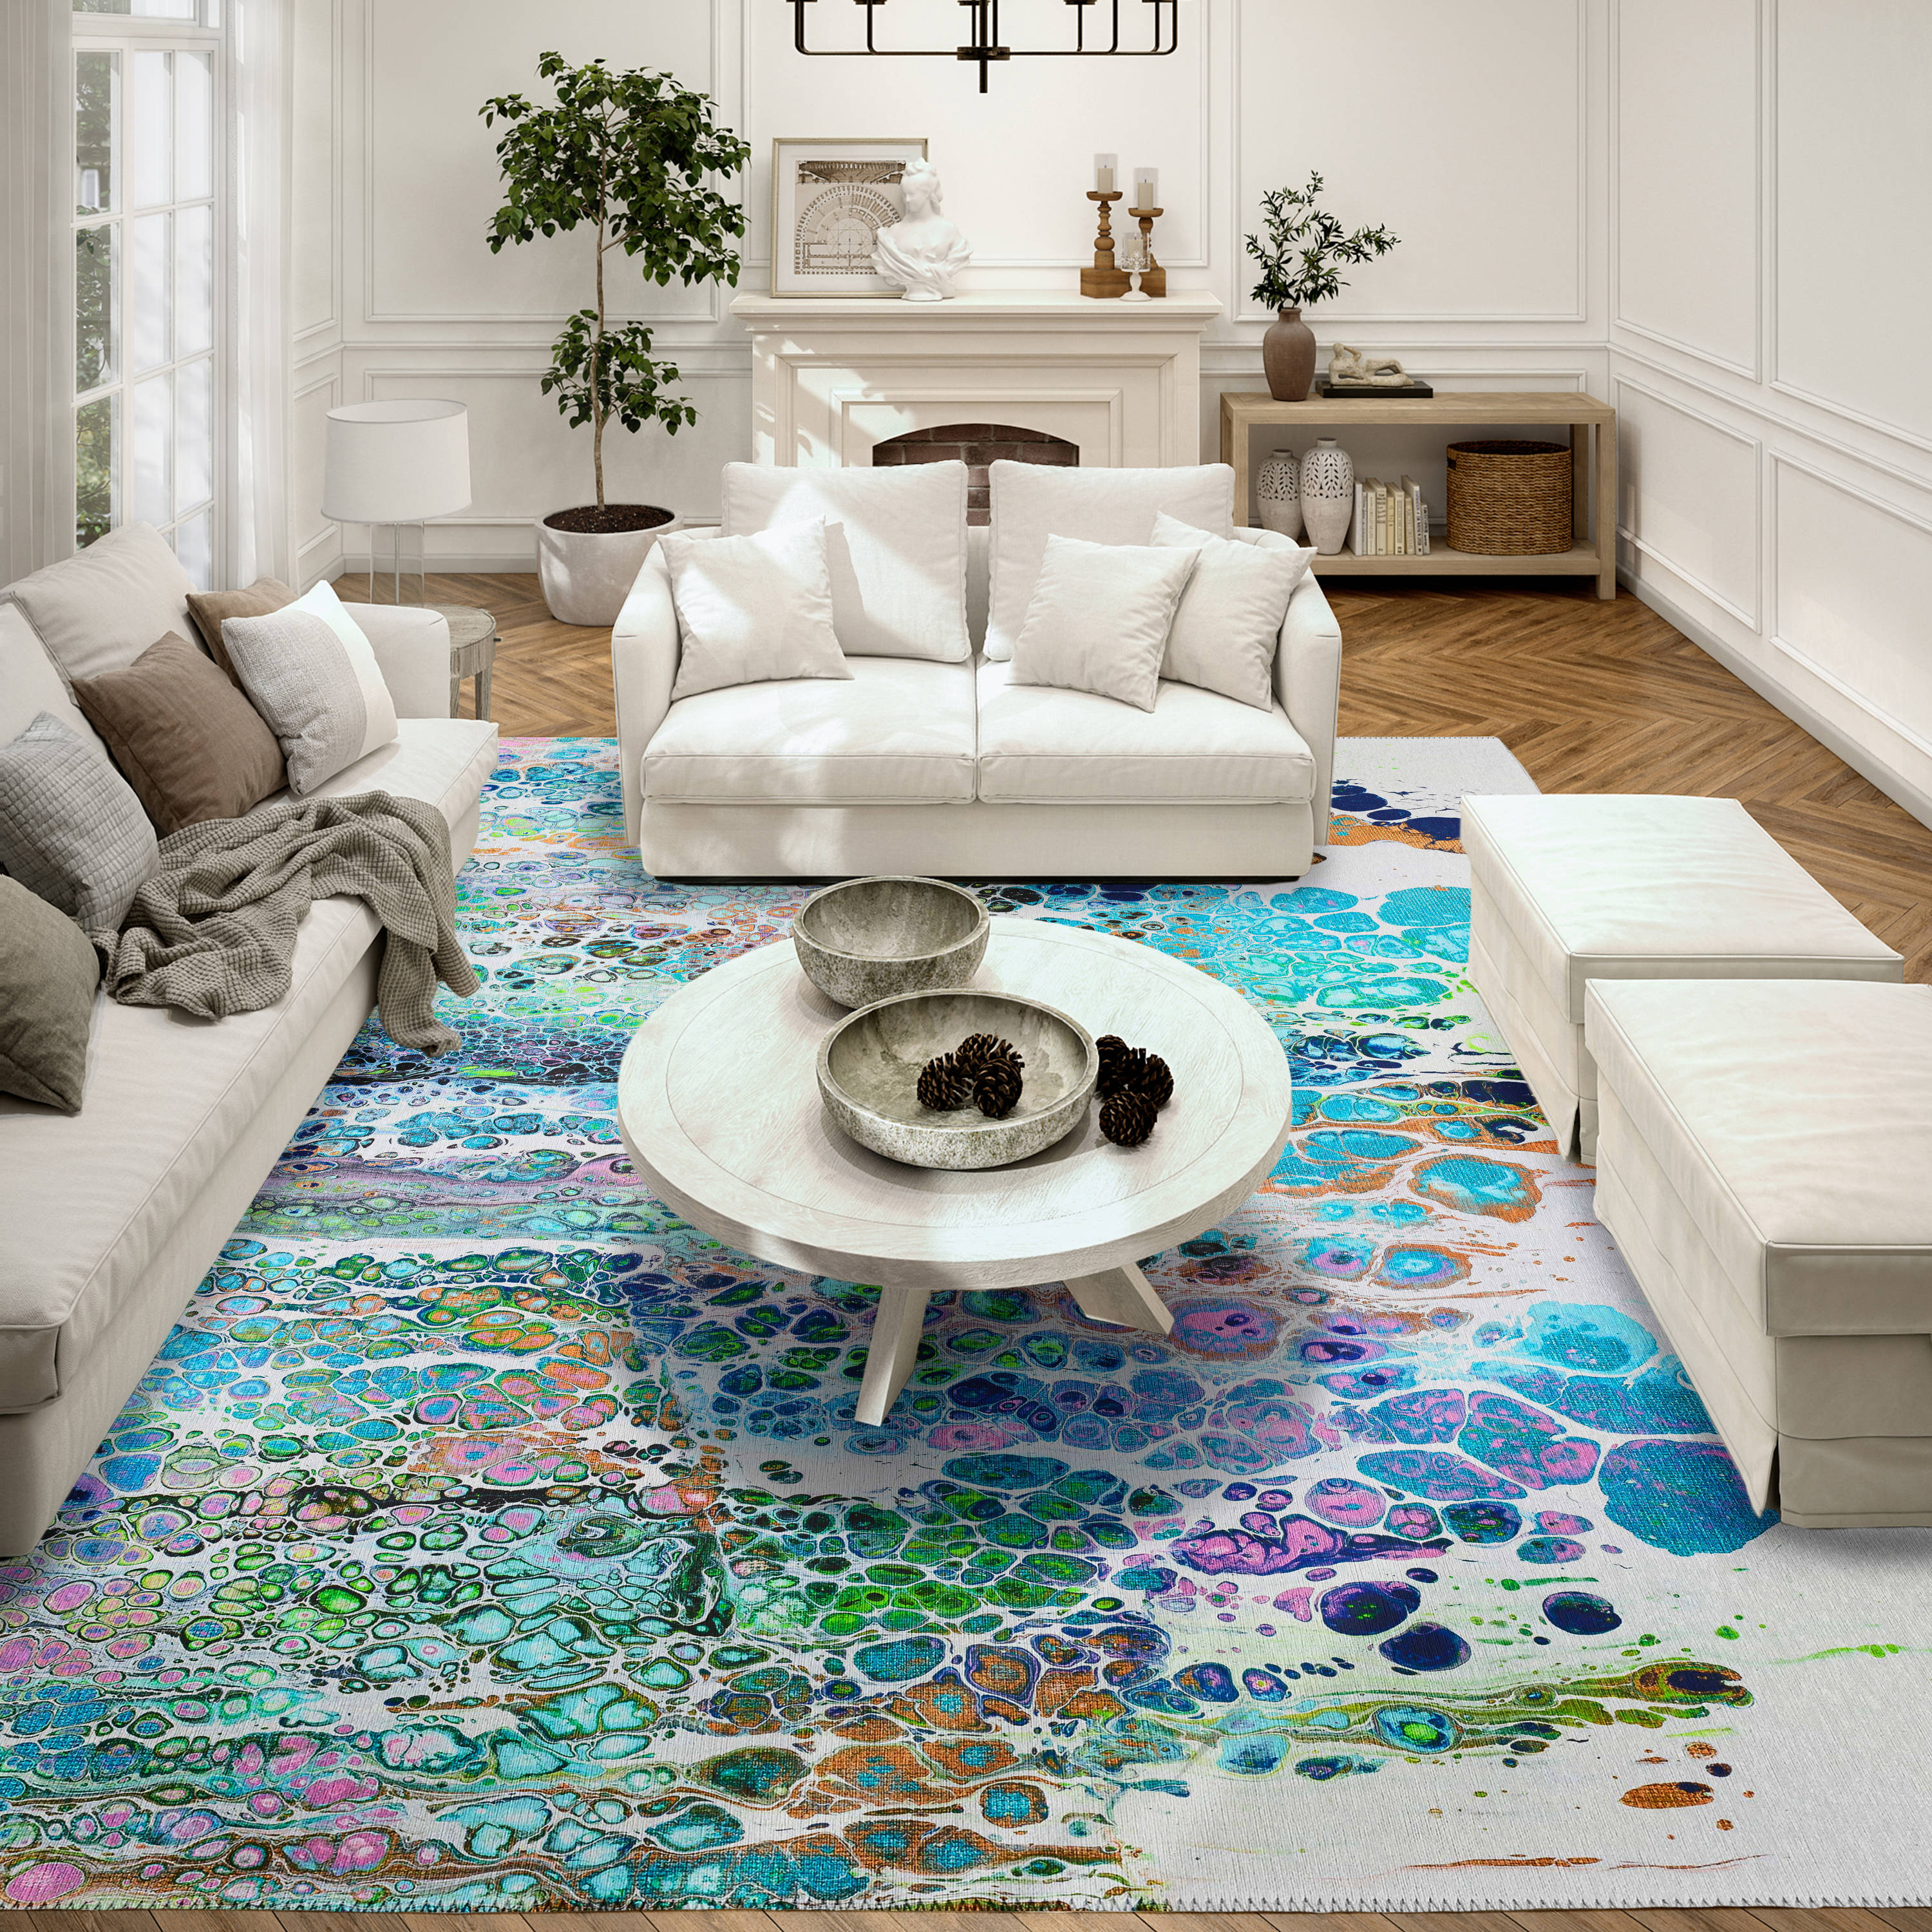 Addison Rugs 8 x 10 Mermaid Indoor/Outdoor Abstract Bohemian/Eclectic ...